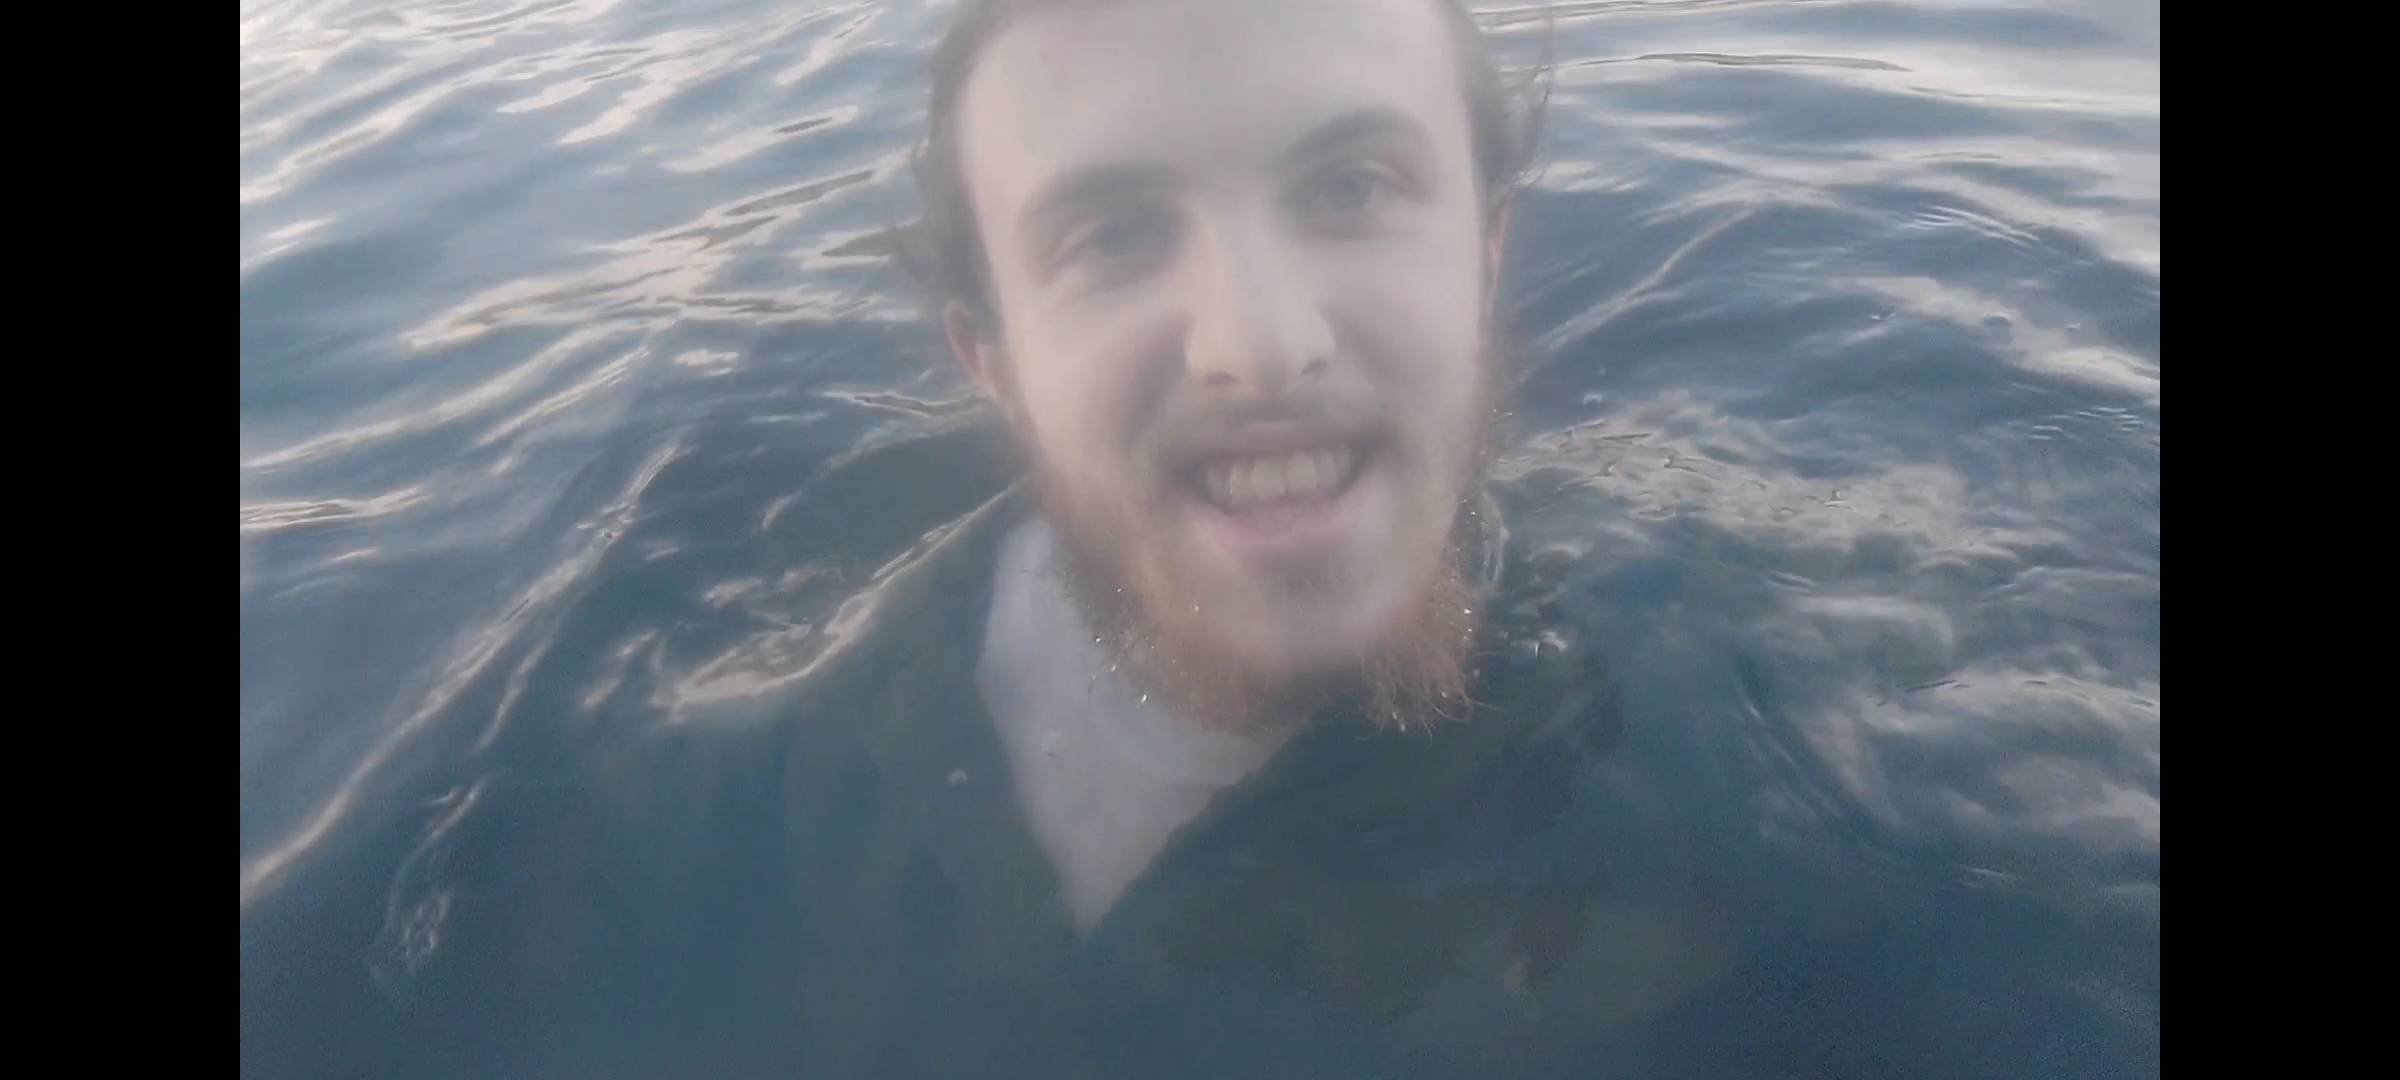 Swimming in a lake fully clothed